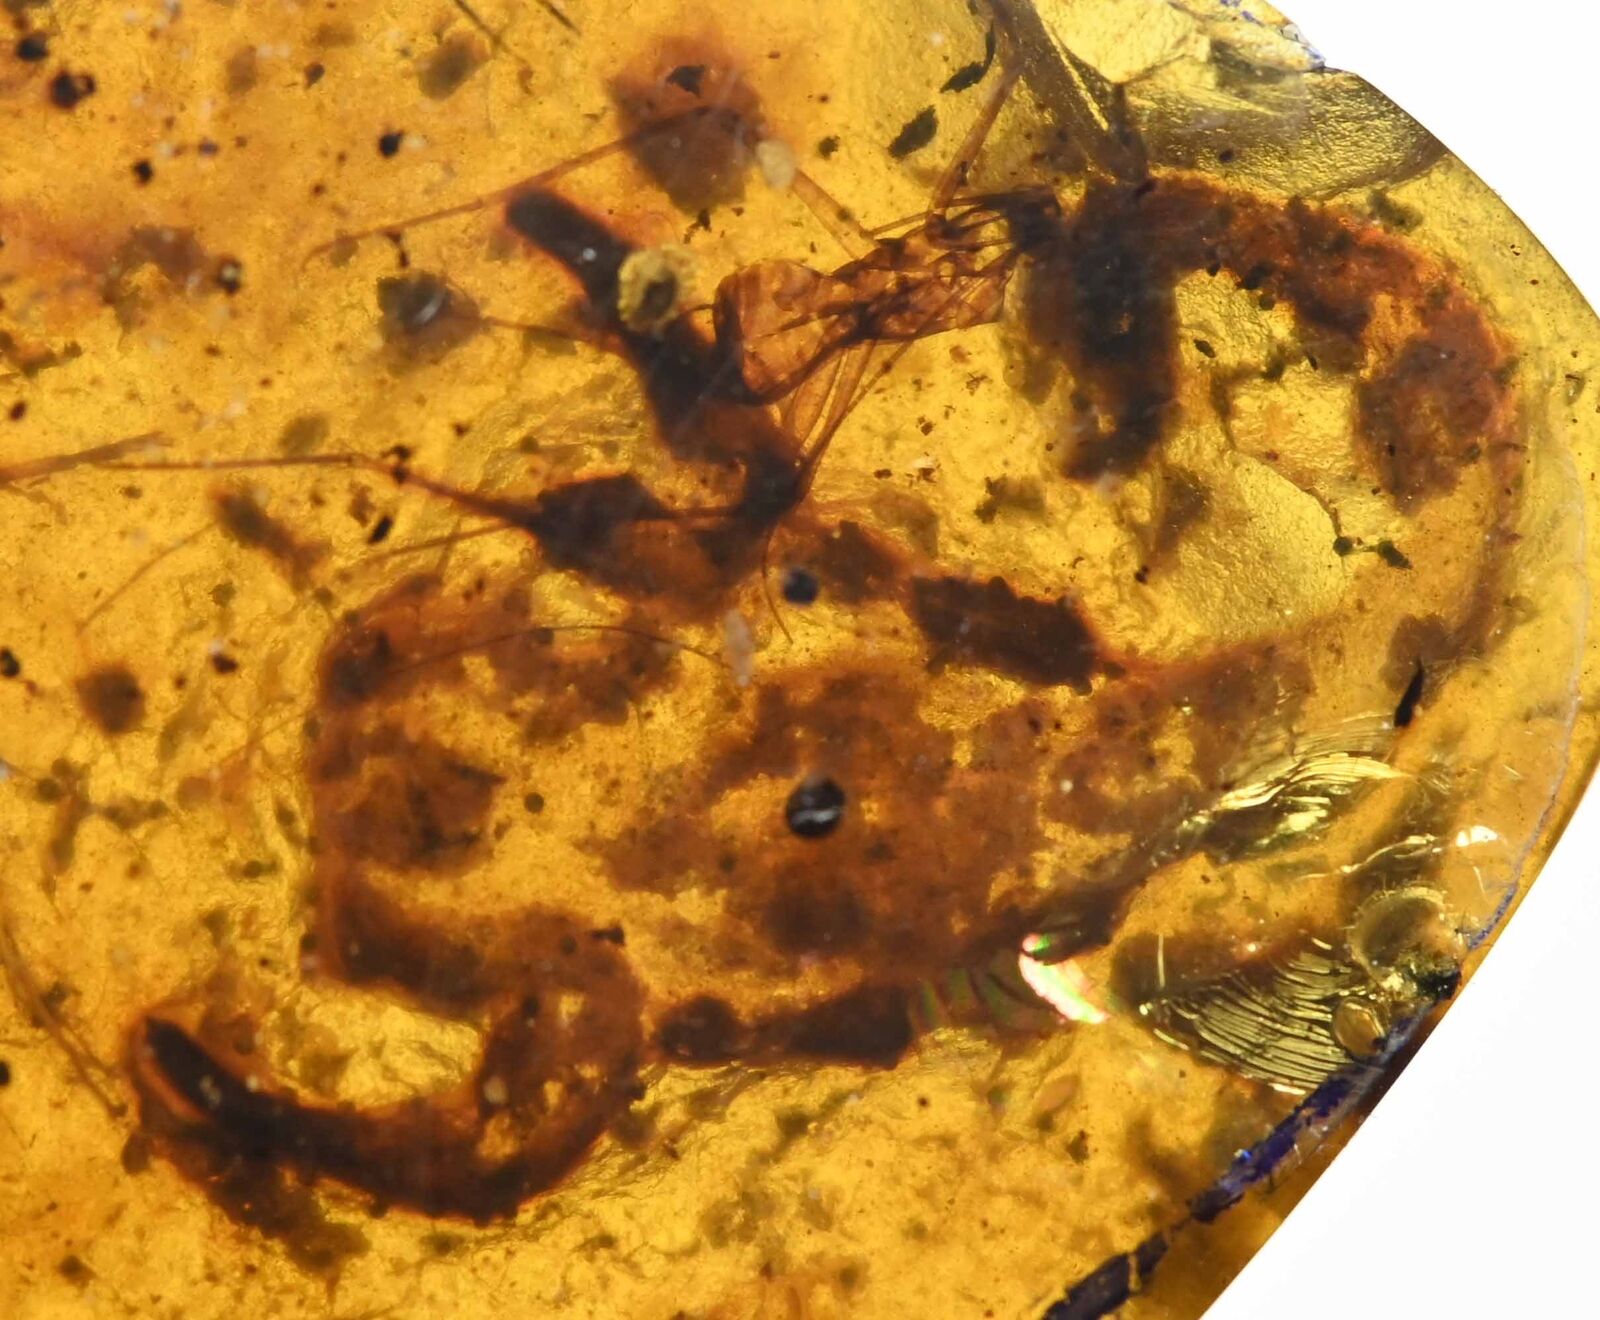 Rare Large Scorpion, Fossil inclusion in Burmese Amber